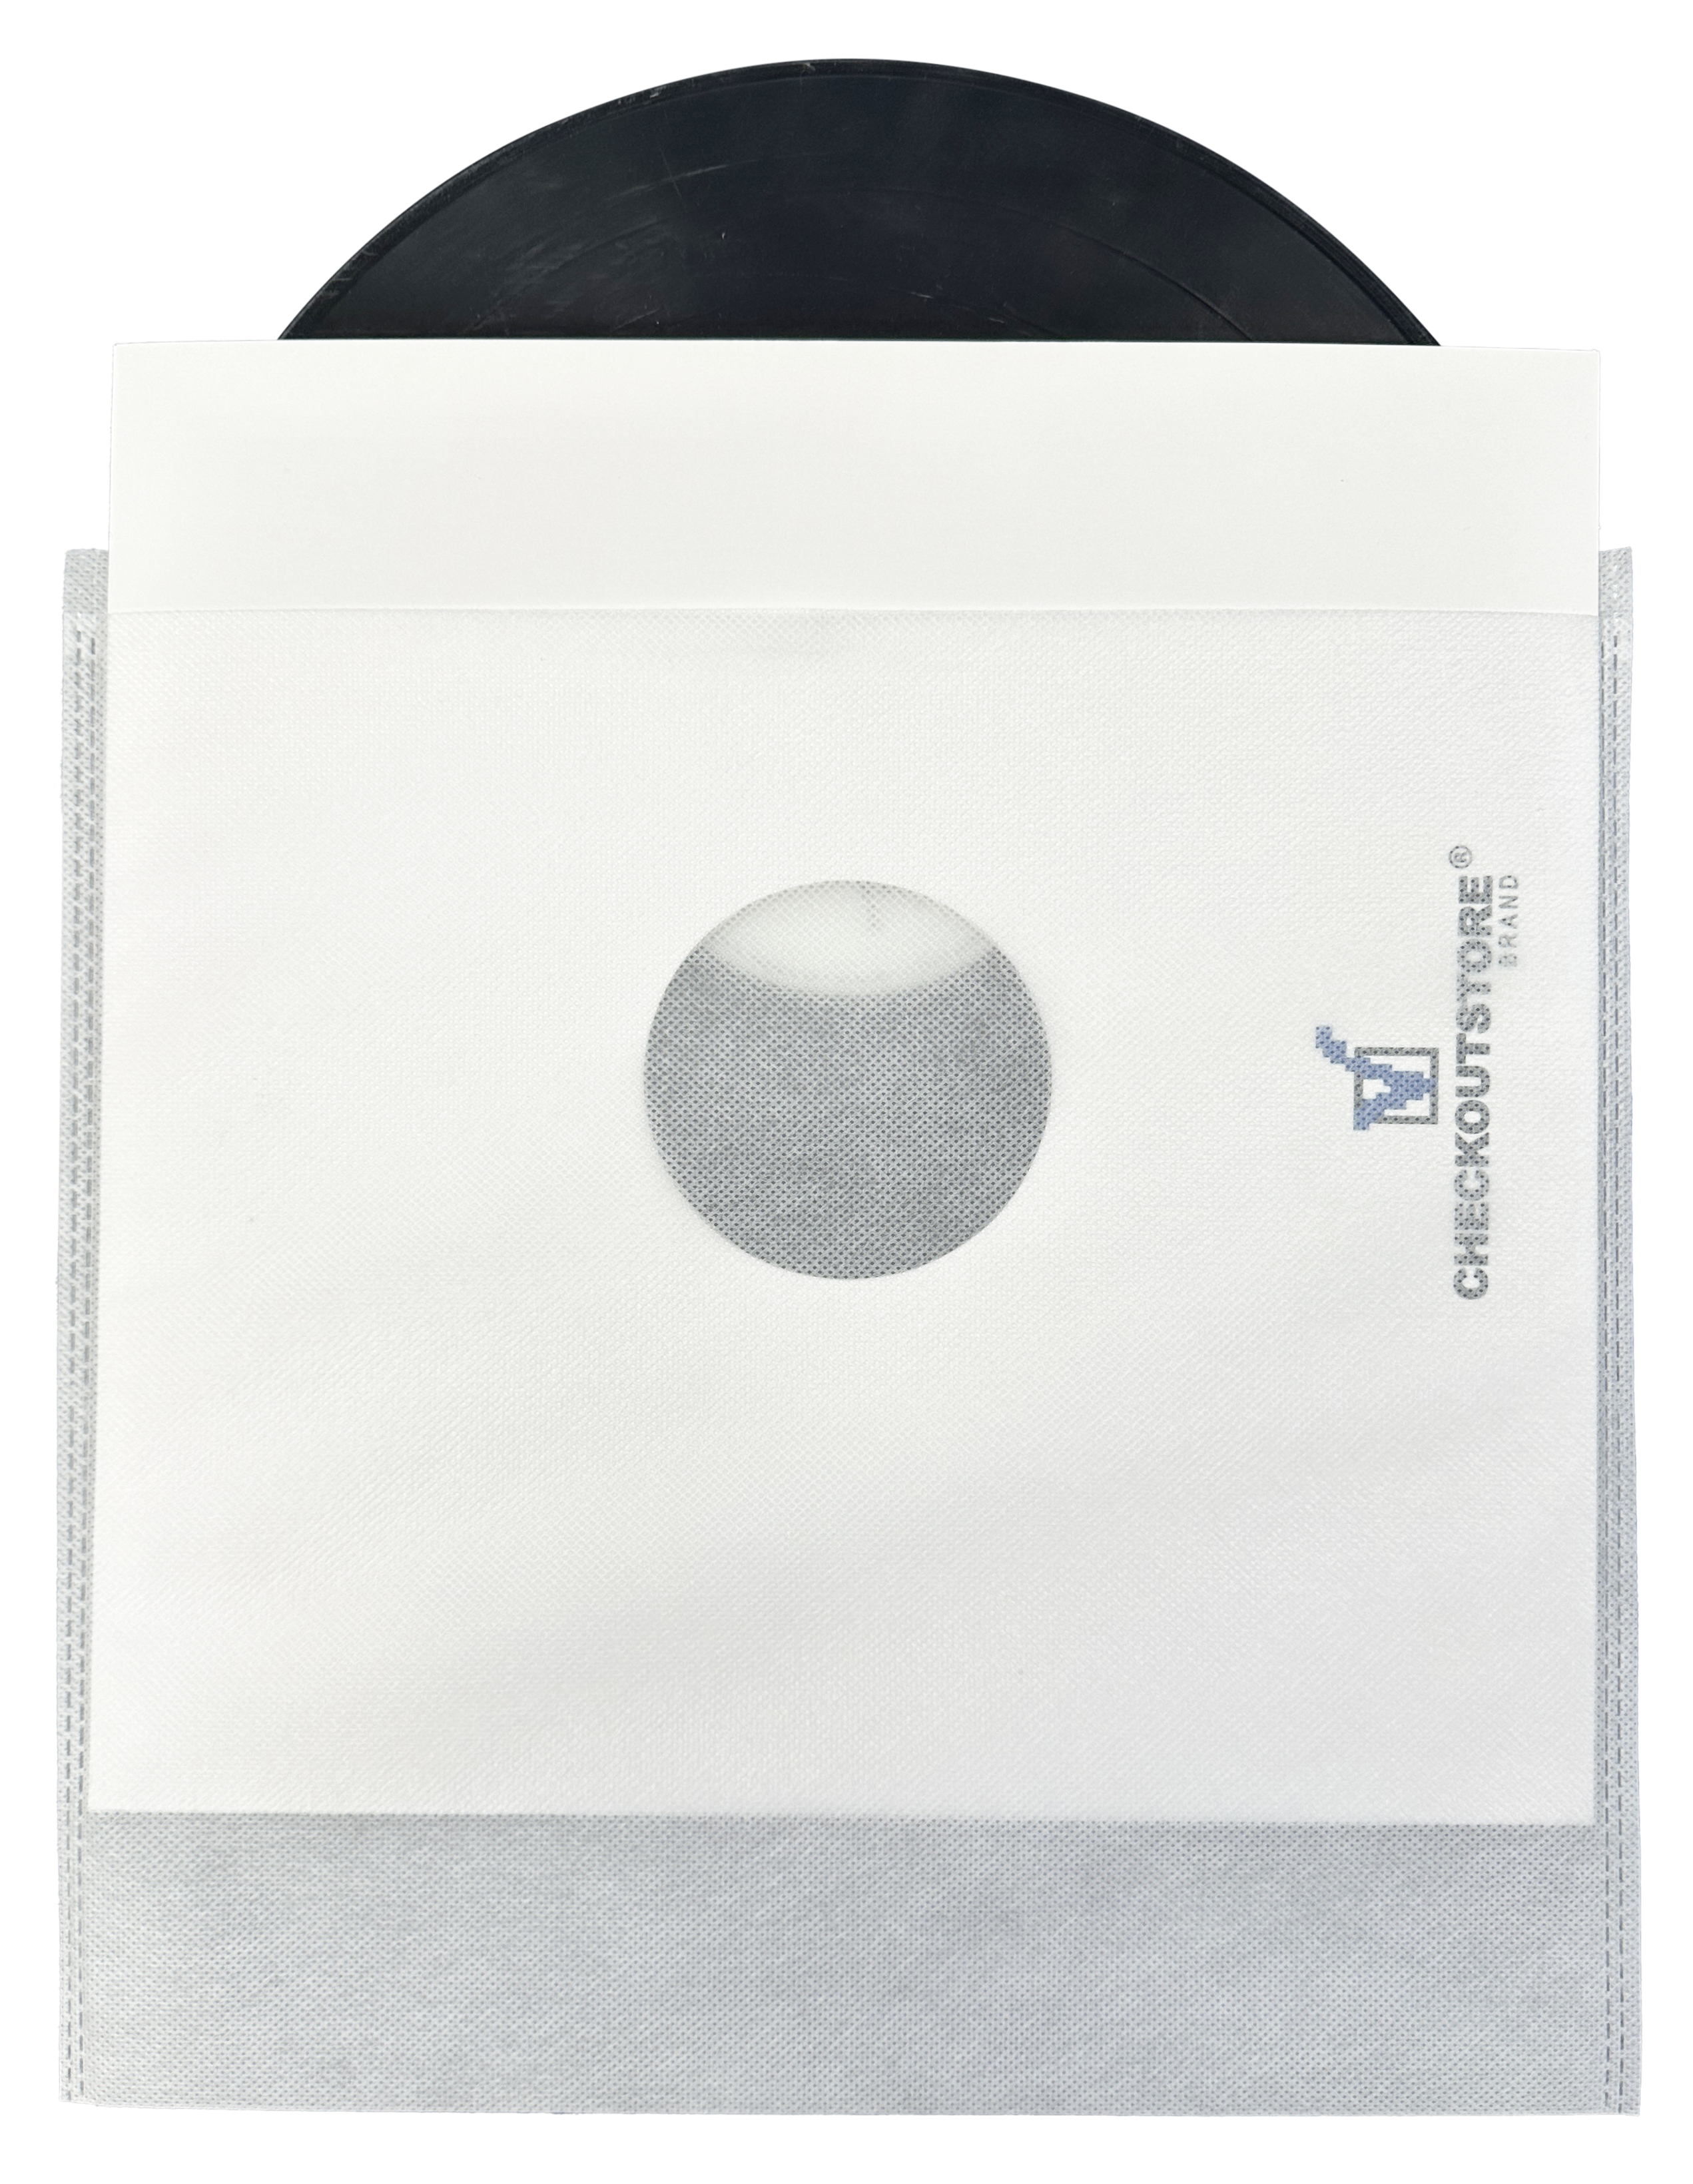 Image of ID 1214260871 2000 CheckOutStore White Non Woven Record Outer Sleeves for 12" LP Vinyl 33 RPM Record Albums